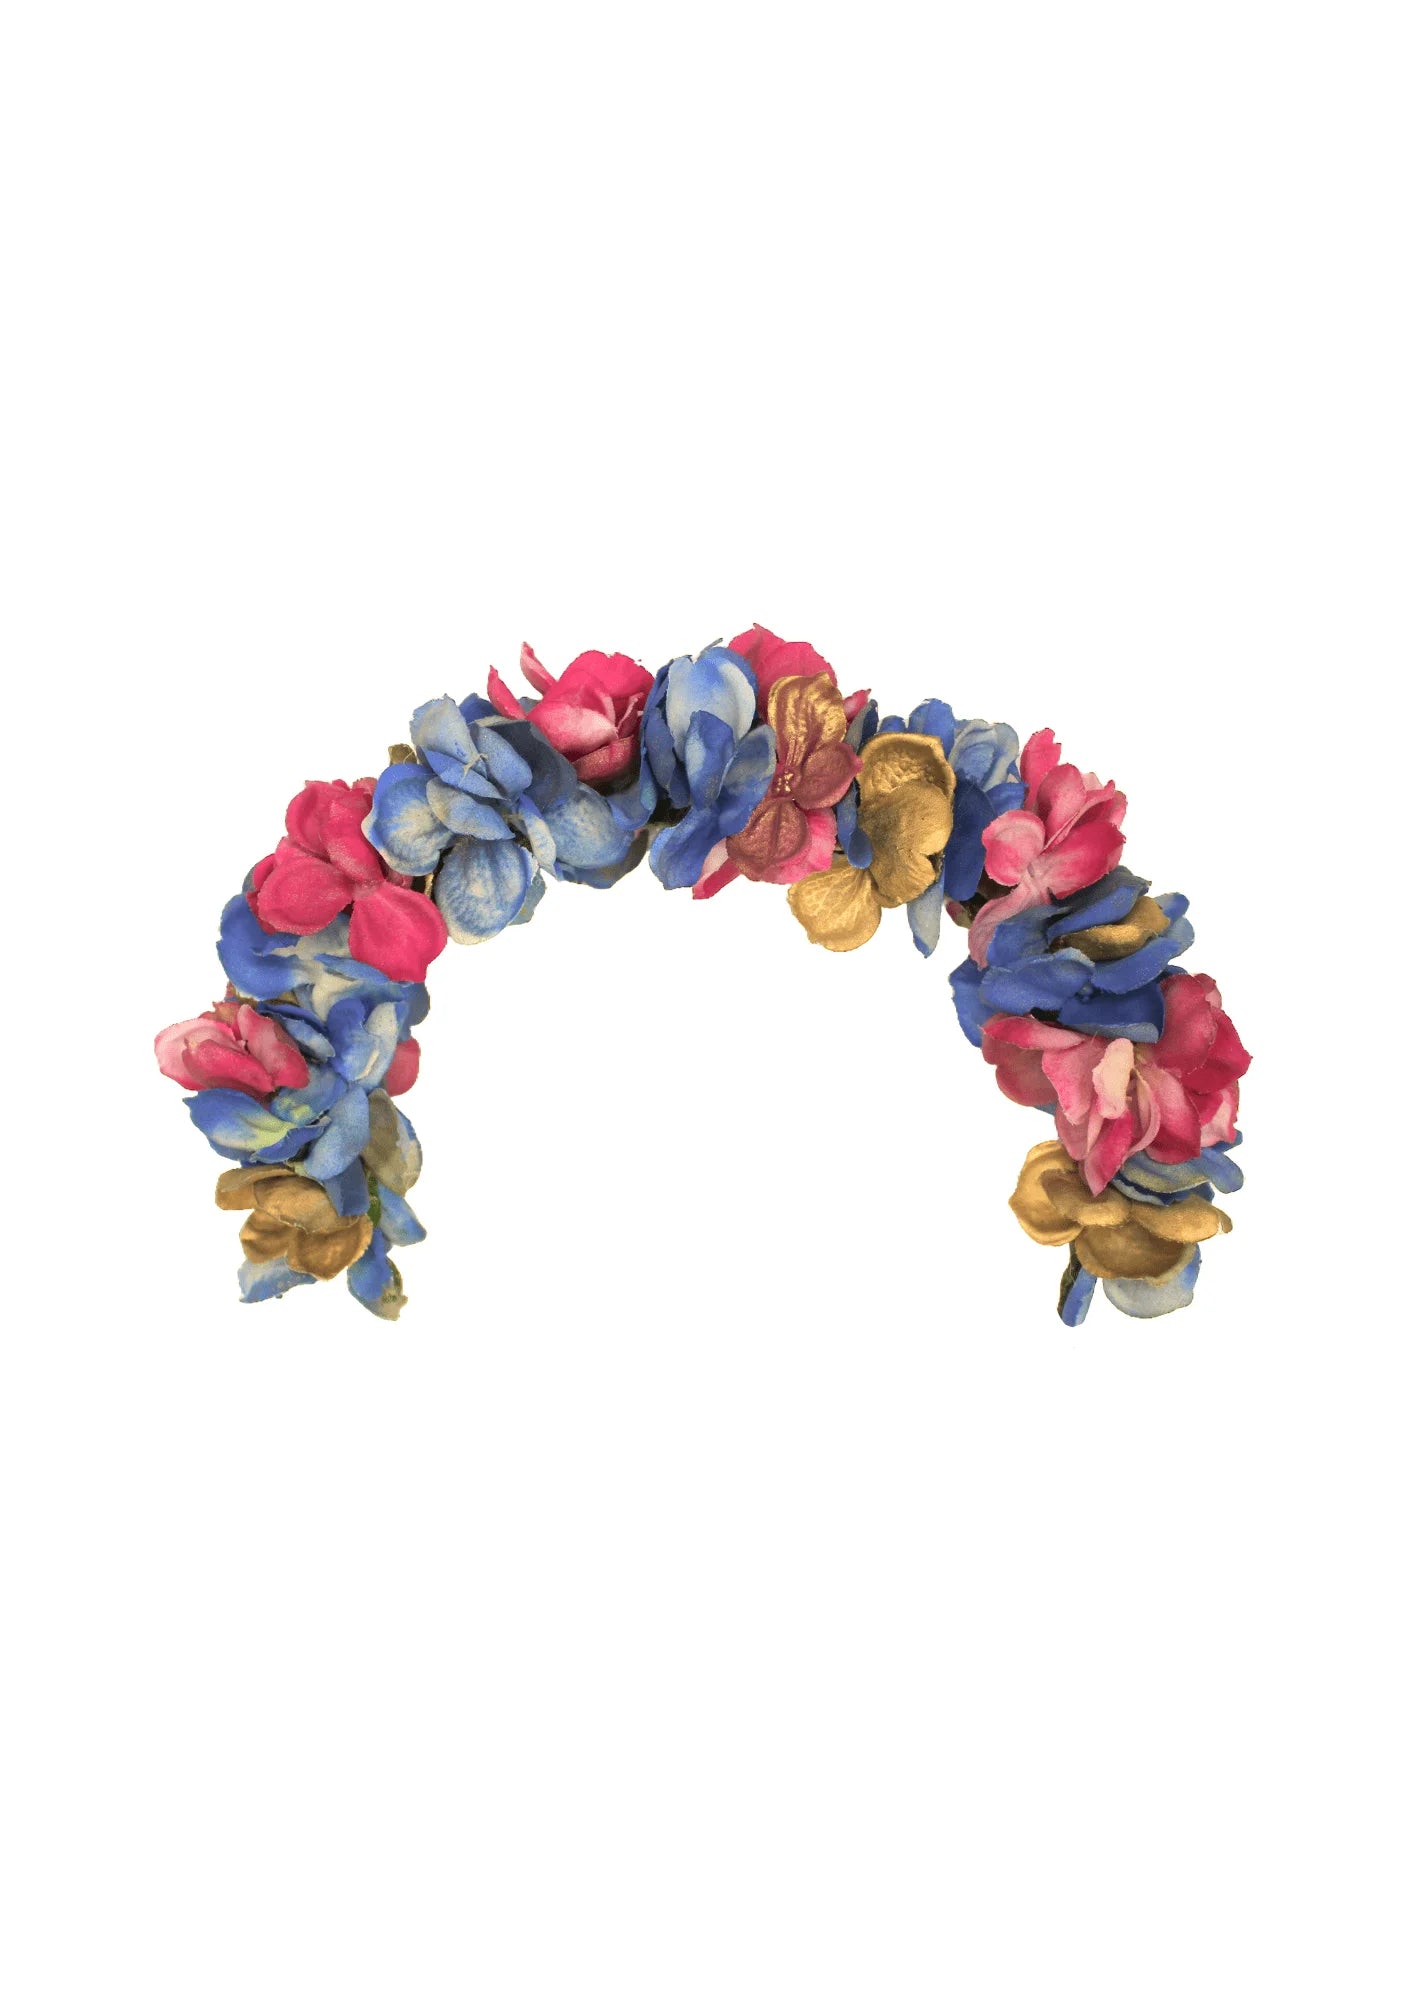 MULTICOLORED TIARA WITH FLOWERS